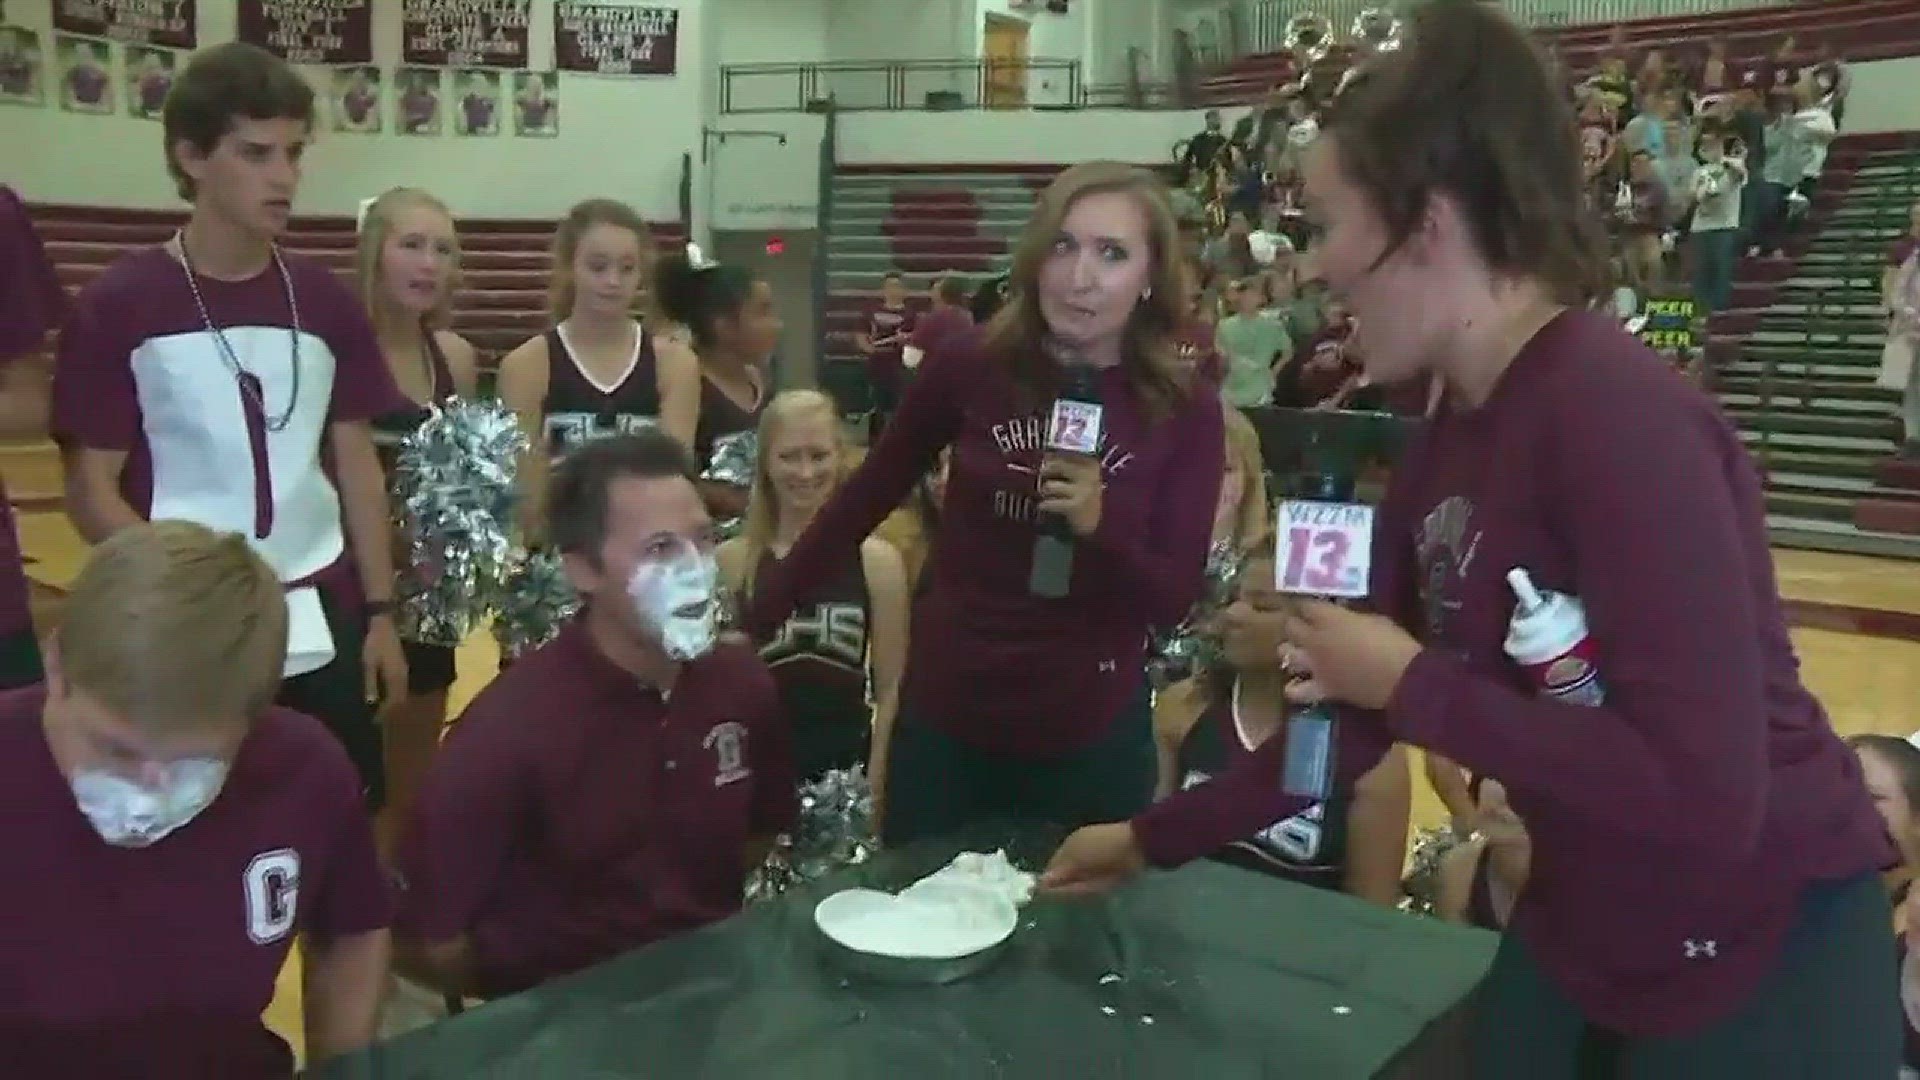 Sunrise Sidelines: Fun and games at Grandville